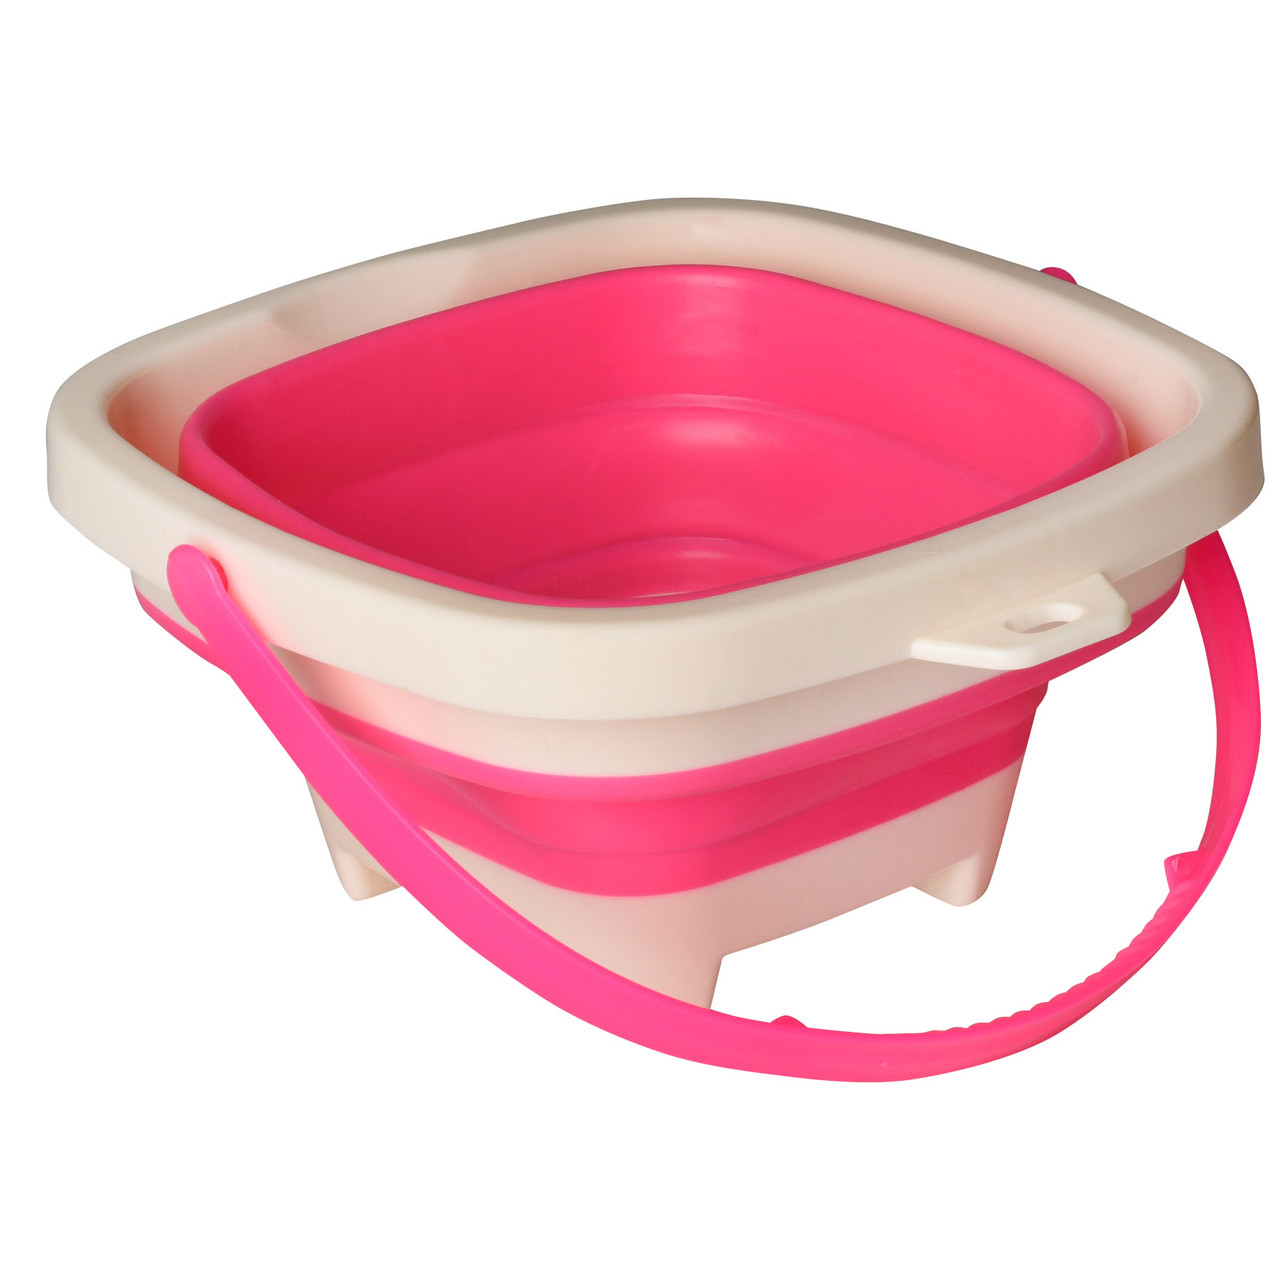 Collapsible Bucket with handle Cleaning Beach Portable Outdoor